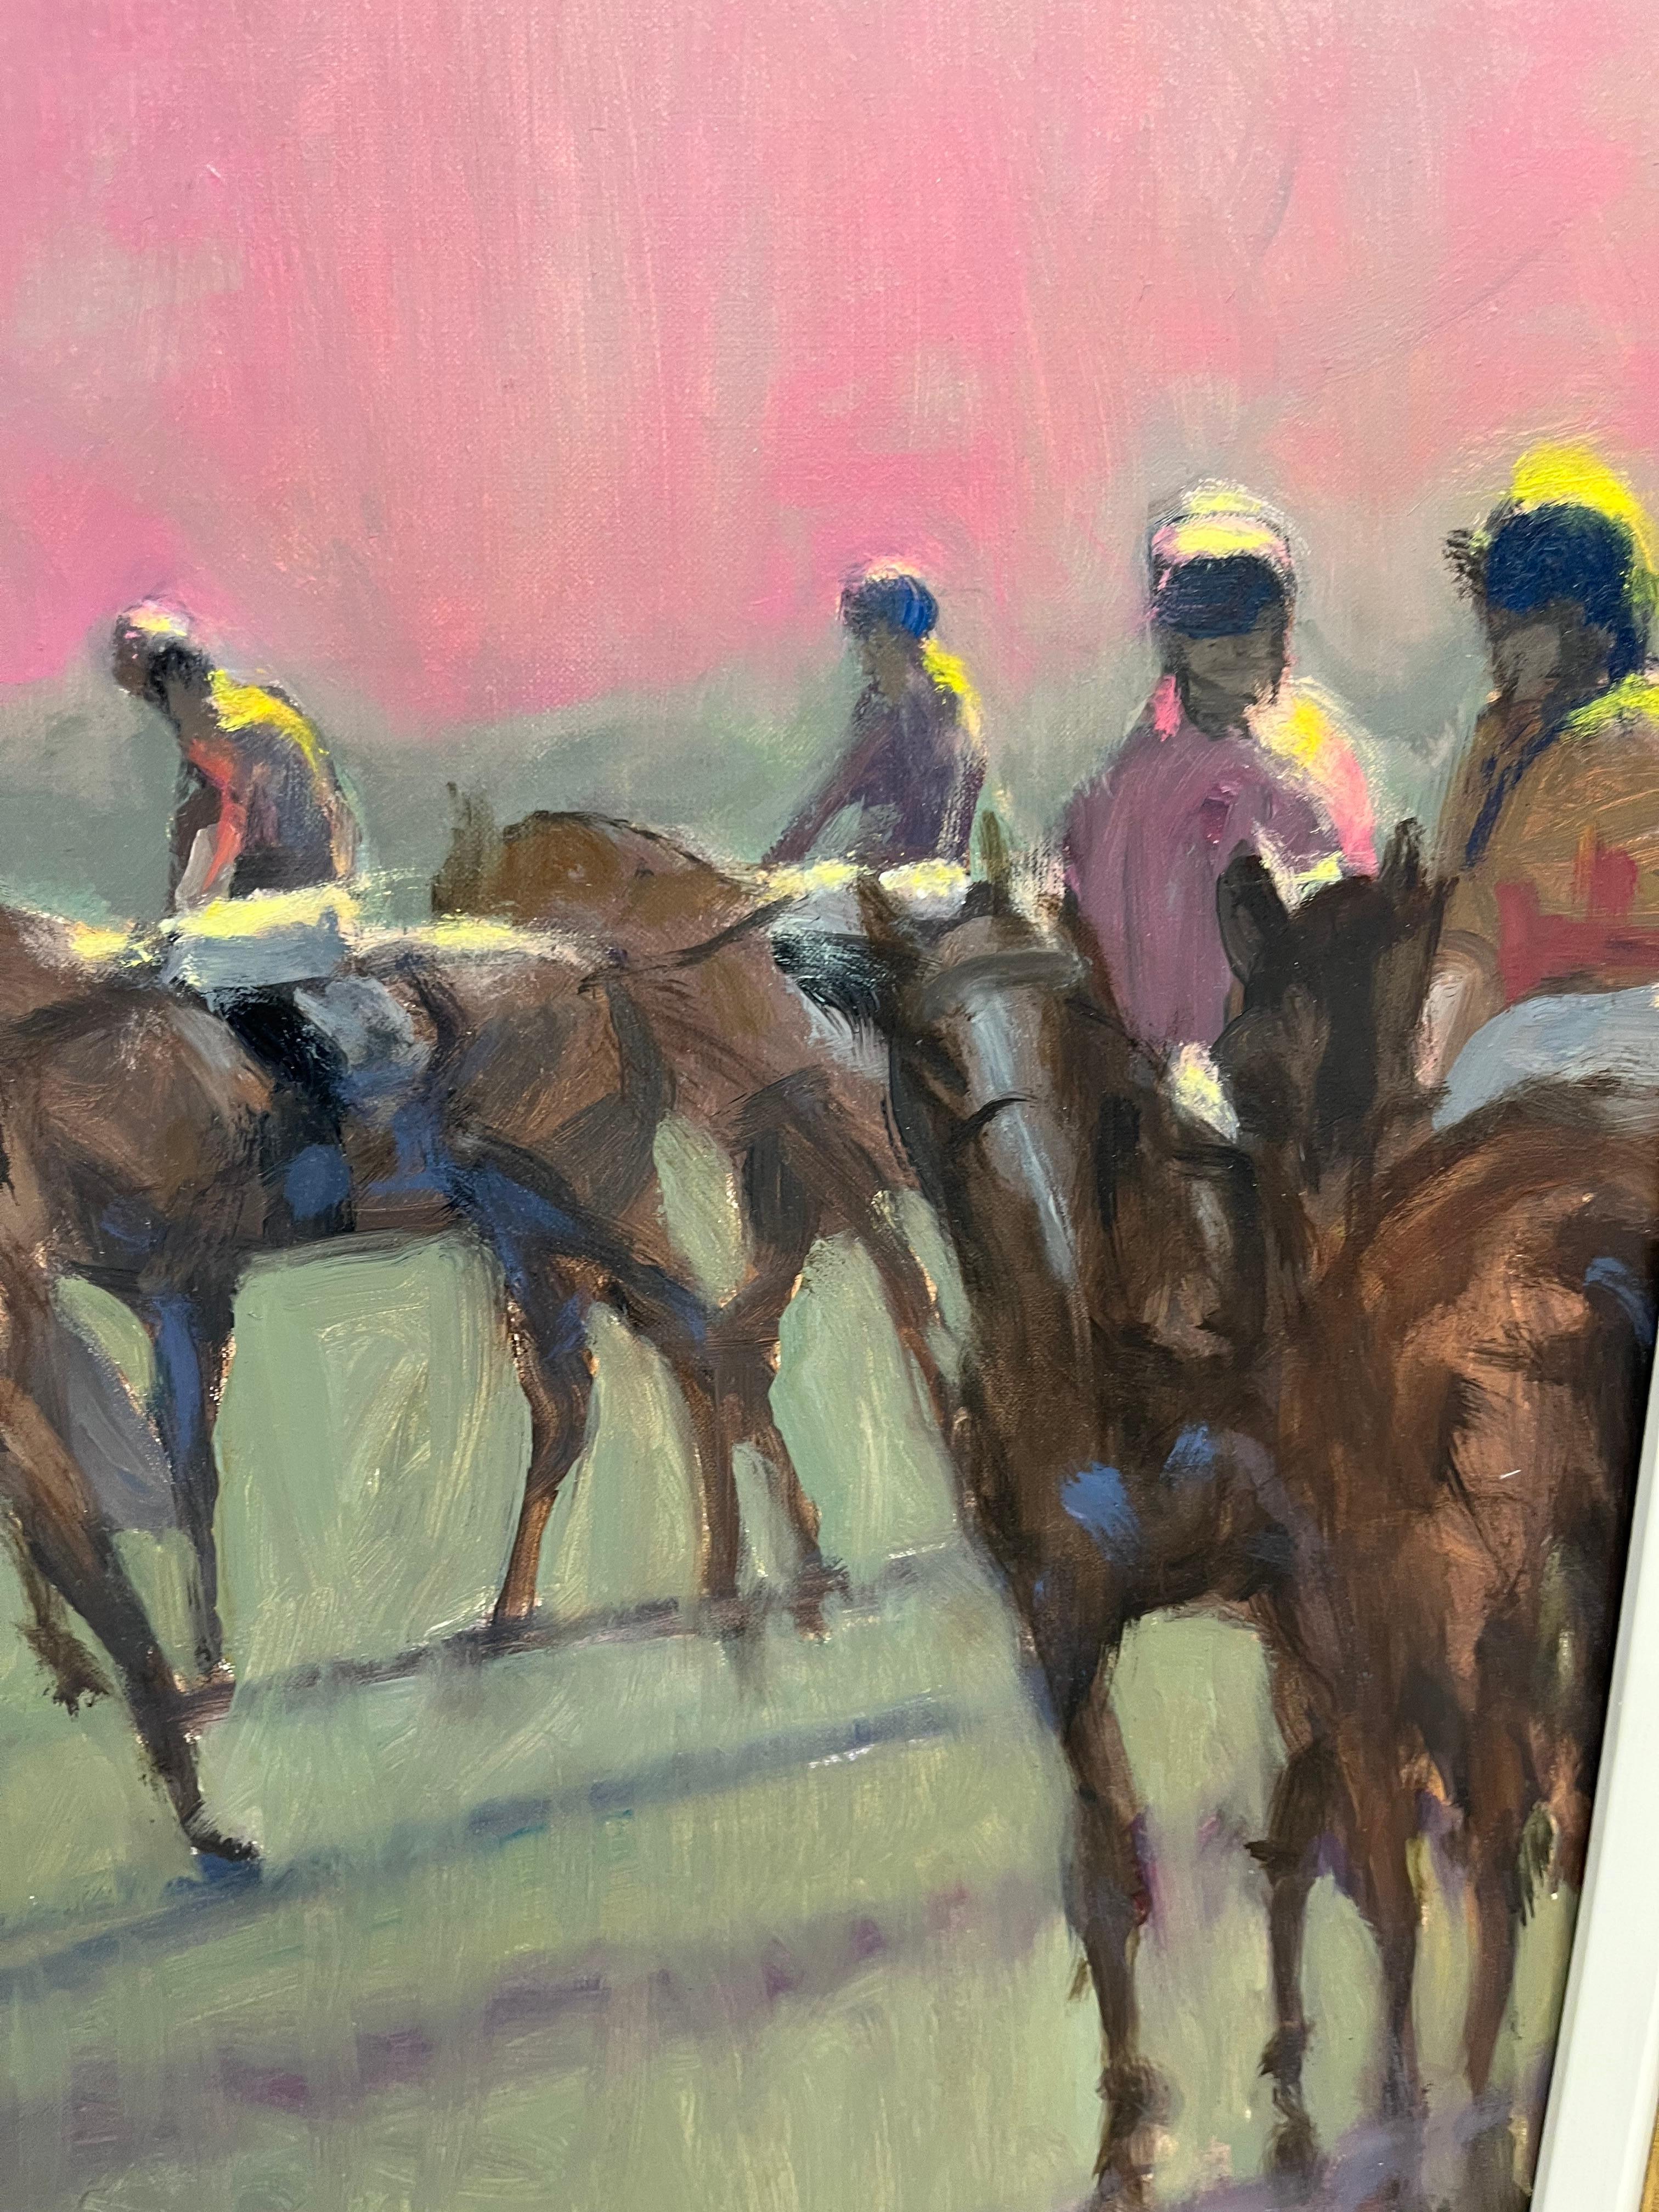 Peter Howell is a British artist who specializes in racing and steeplechase scenes. Here he shows racehorses as the horses head to the start of a European race with their jockeys.